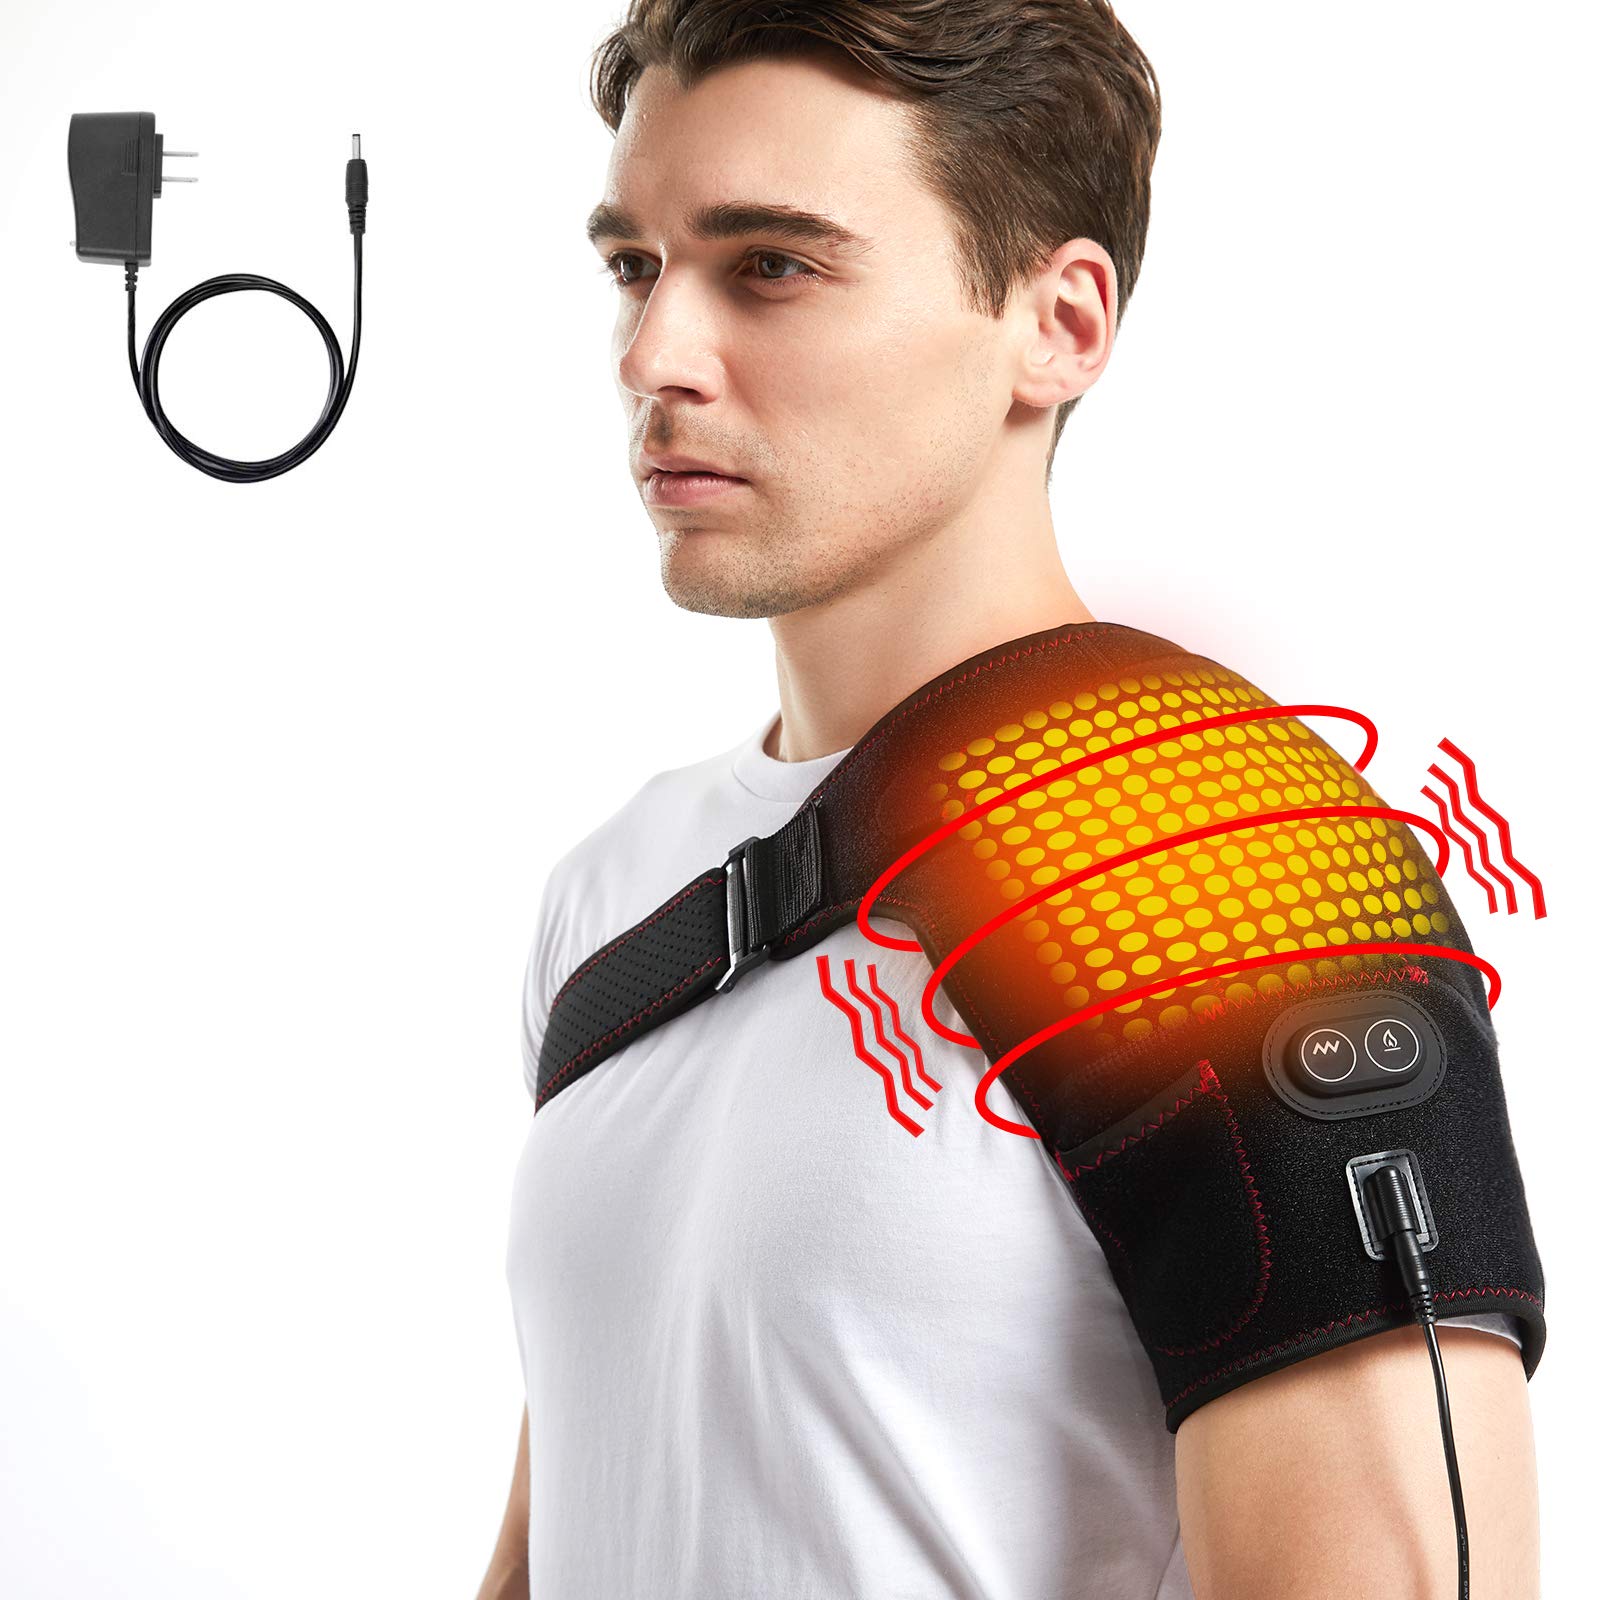 Heated Shoulder Wrap with Massage, Electric Shoulder Massager Heating Pad for Men Women Frozen Shoulder Pain Relief with AC Adapter